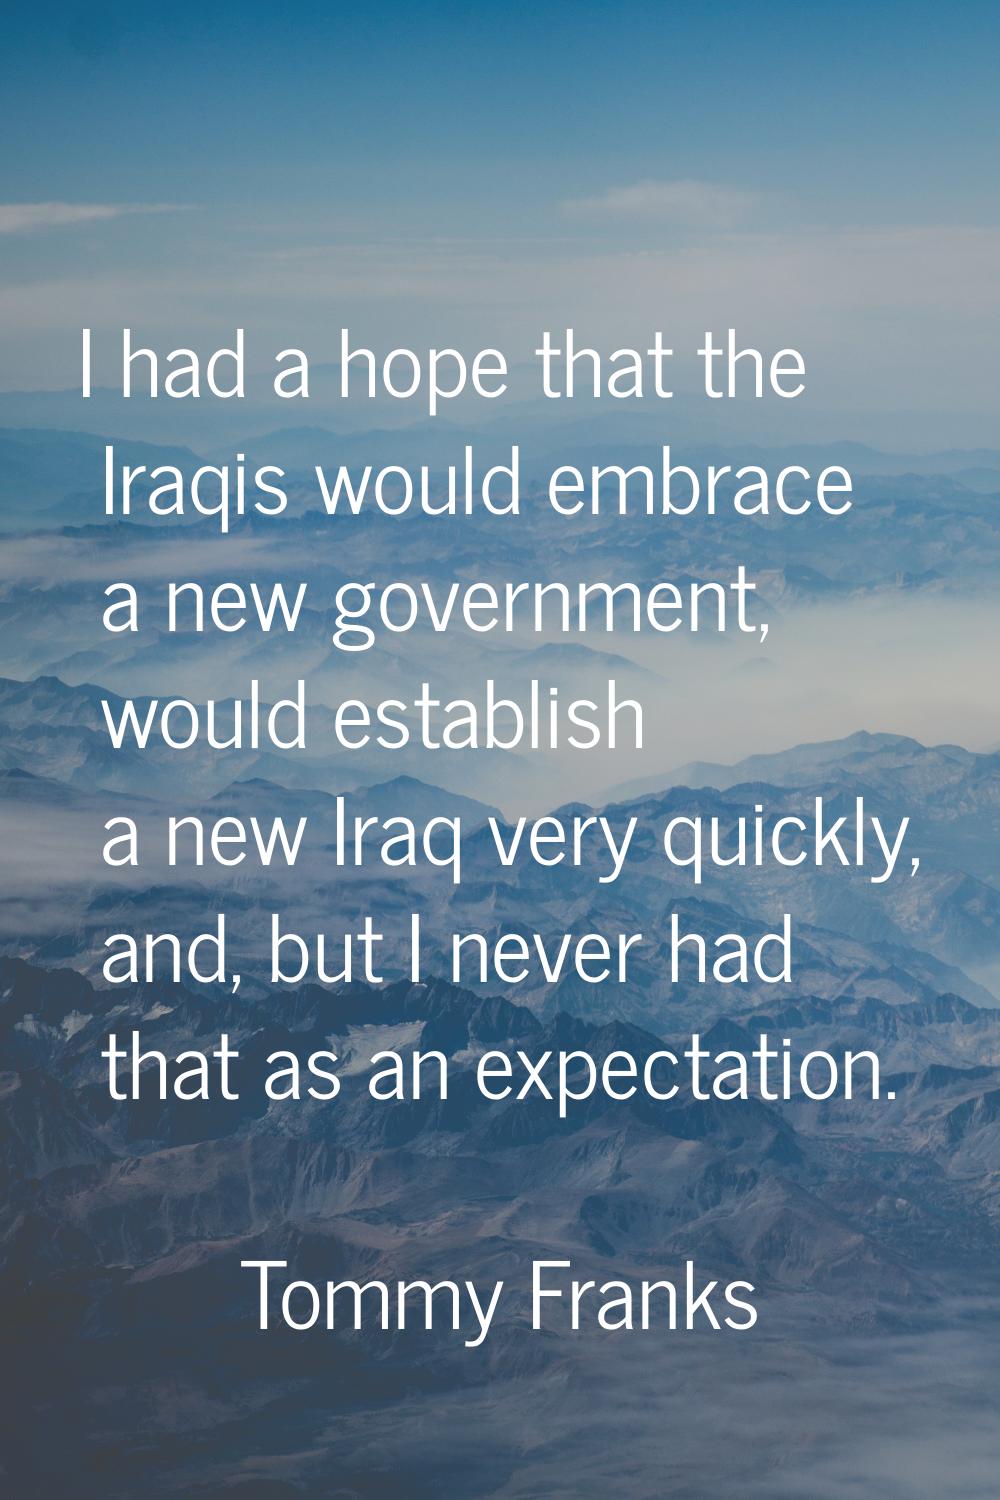 I had a hope that the Iraqis would embrace a new government, would establish a new Iraq very quickl